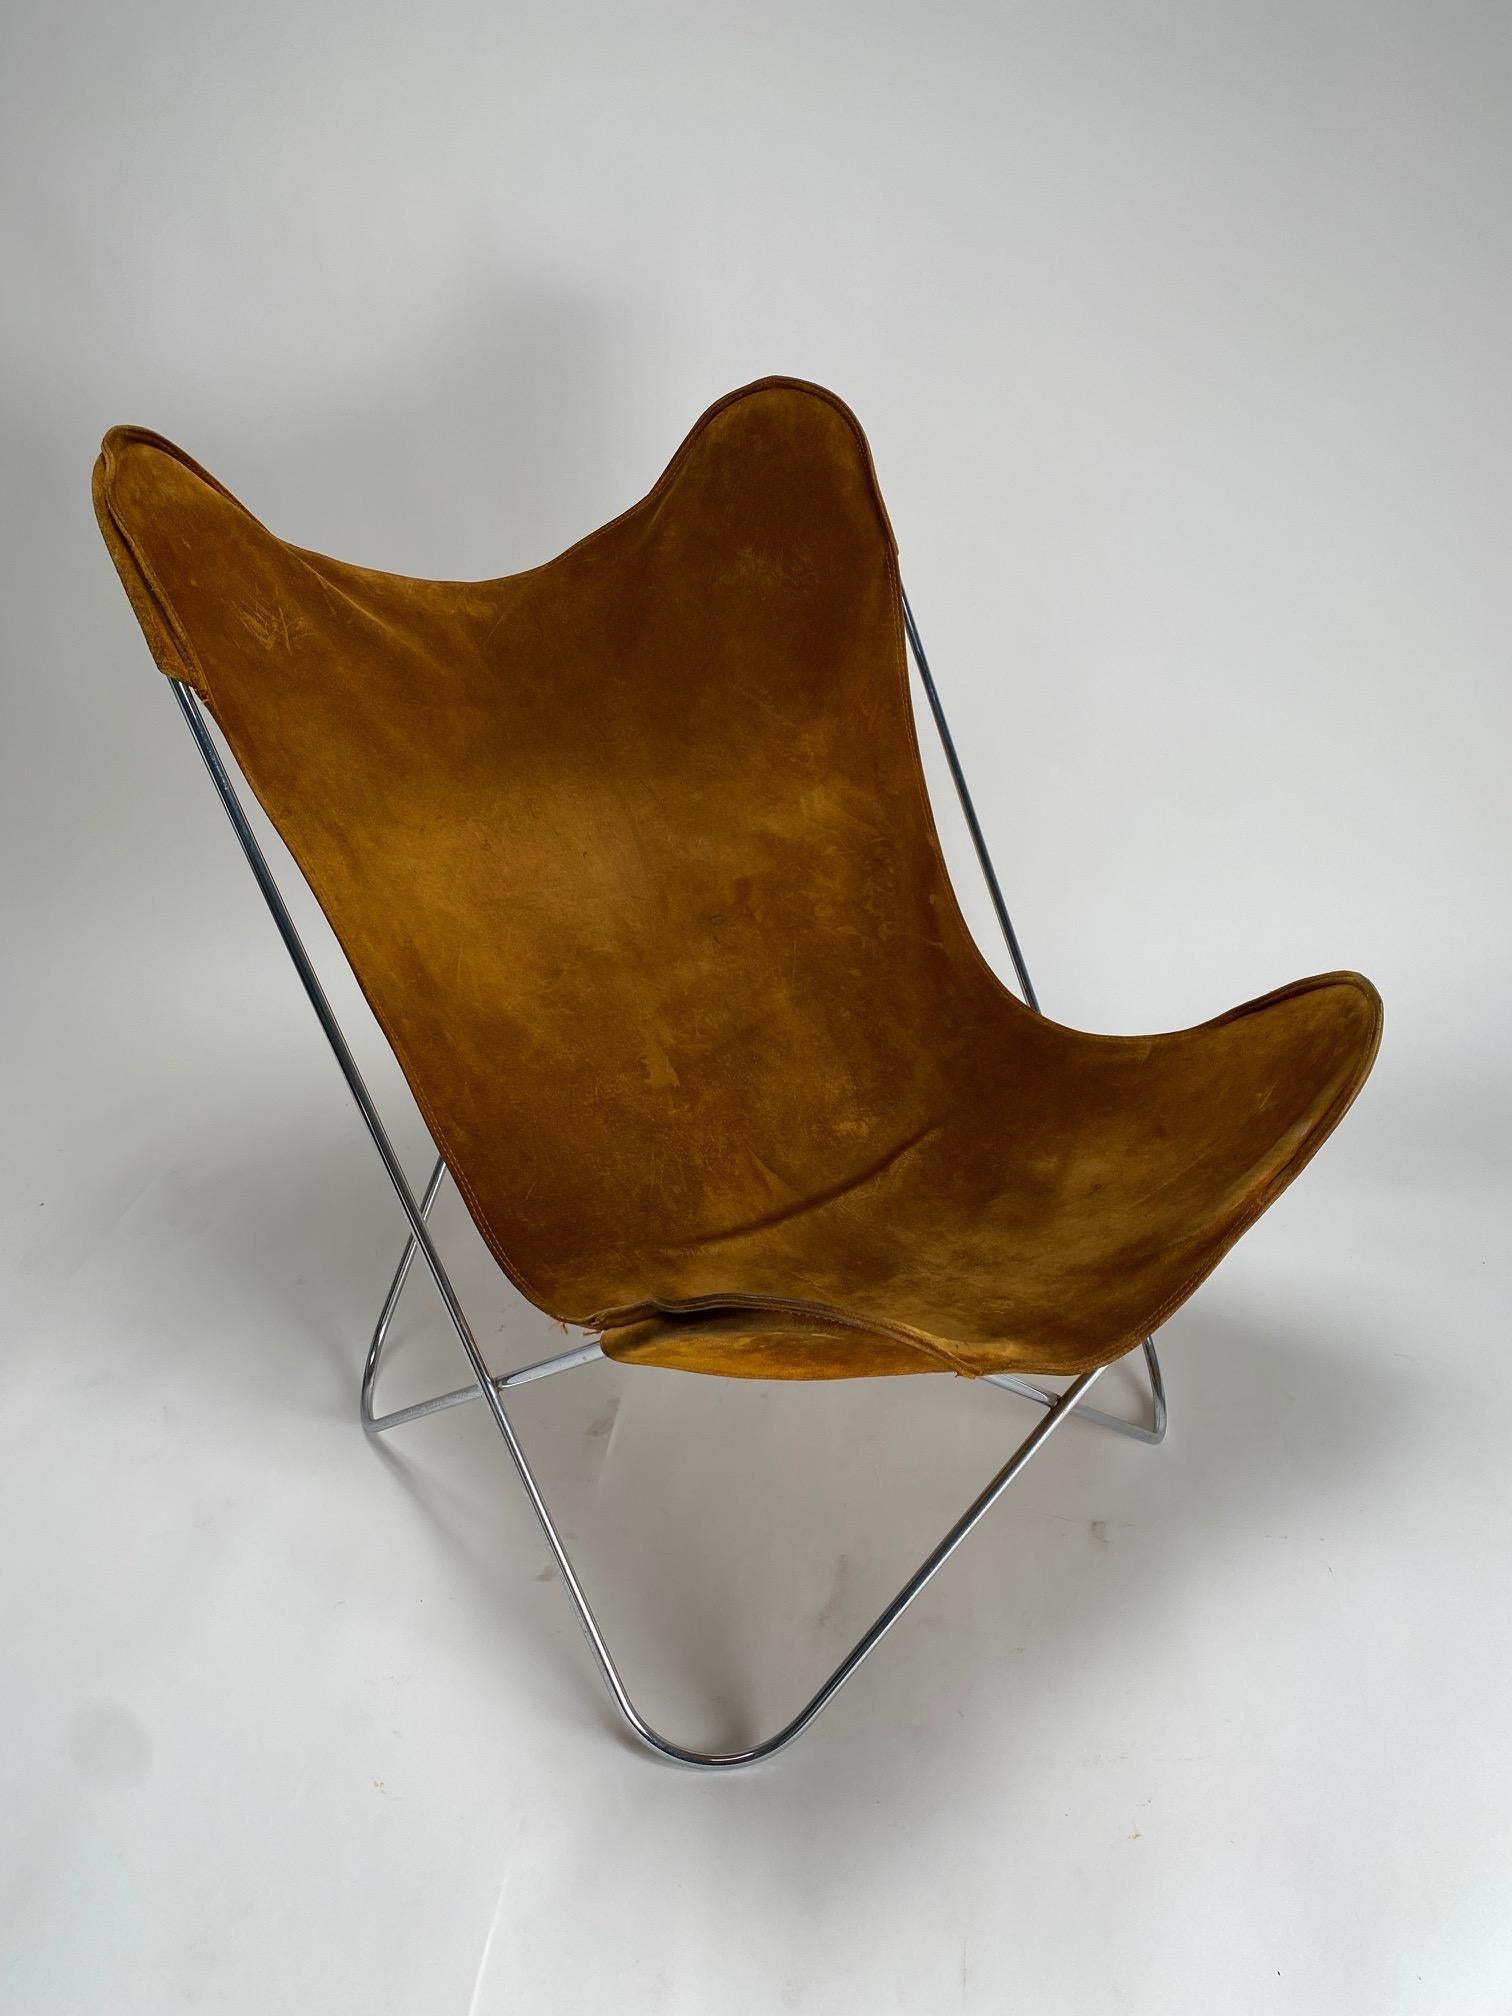 Steel Tripolina armchair produced by Dino Gavina, Italy 1950s For Sale